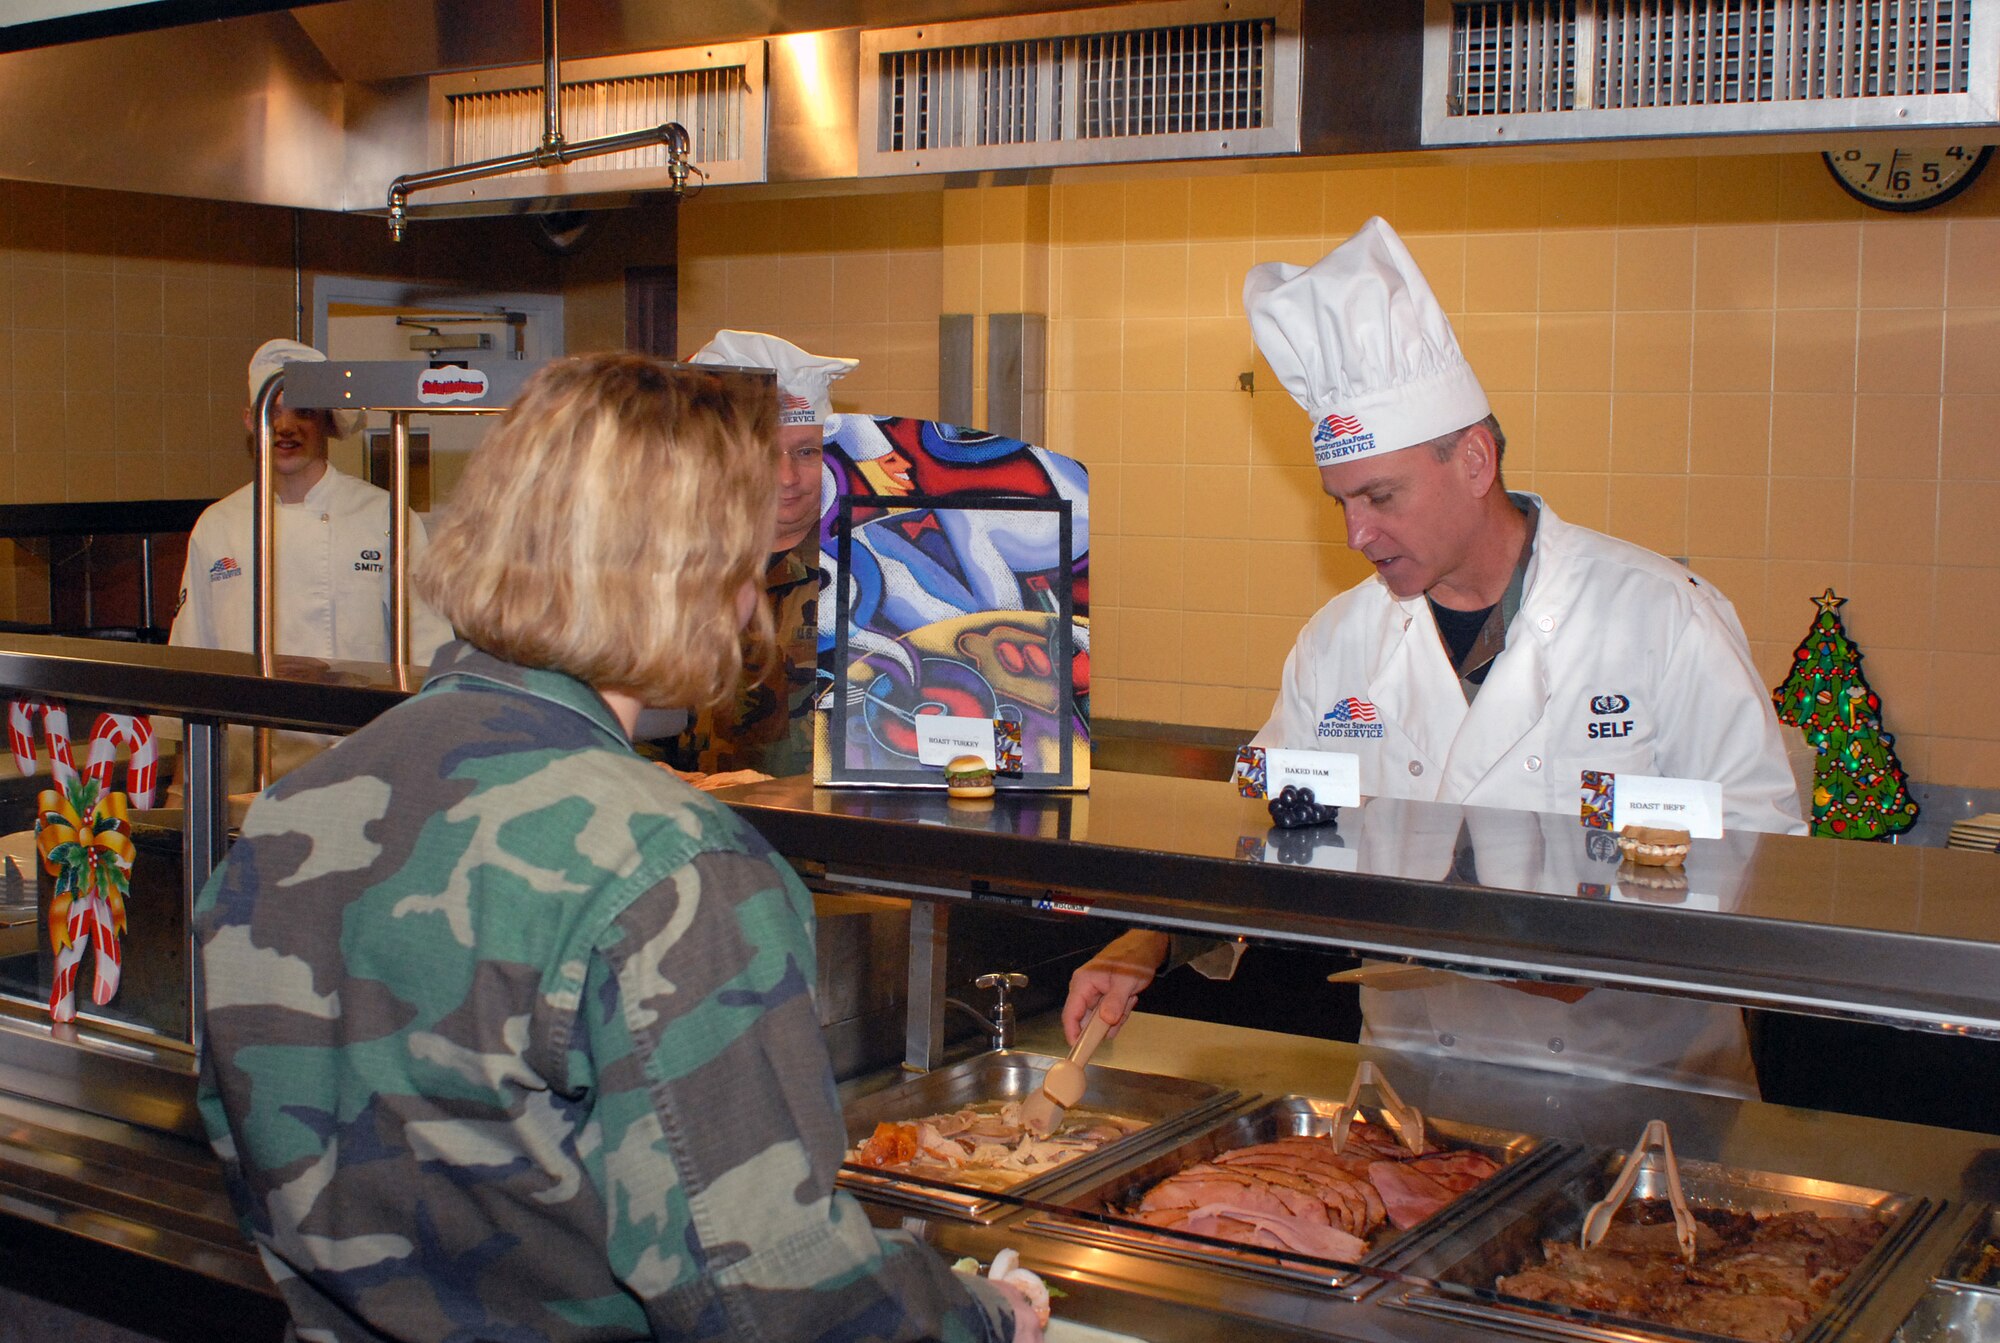 Brig. Gen. Kip Self, 314th Airlift Wing commander, serves food to Airmen at the dining facility Christmas Day. Each year, commanders serve the Airmen at the dining facility to share the special day with base Airmen and thank them for their service. (Photo by Airman 1st Class Nathan Allen)